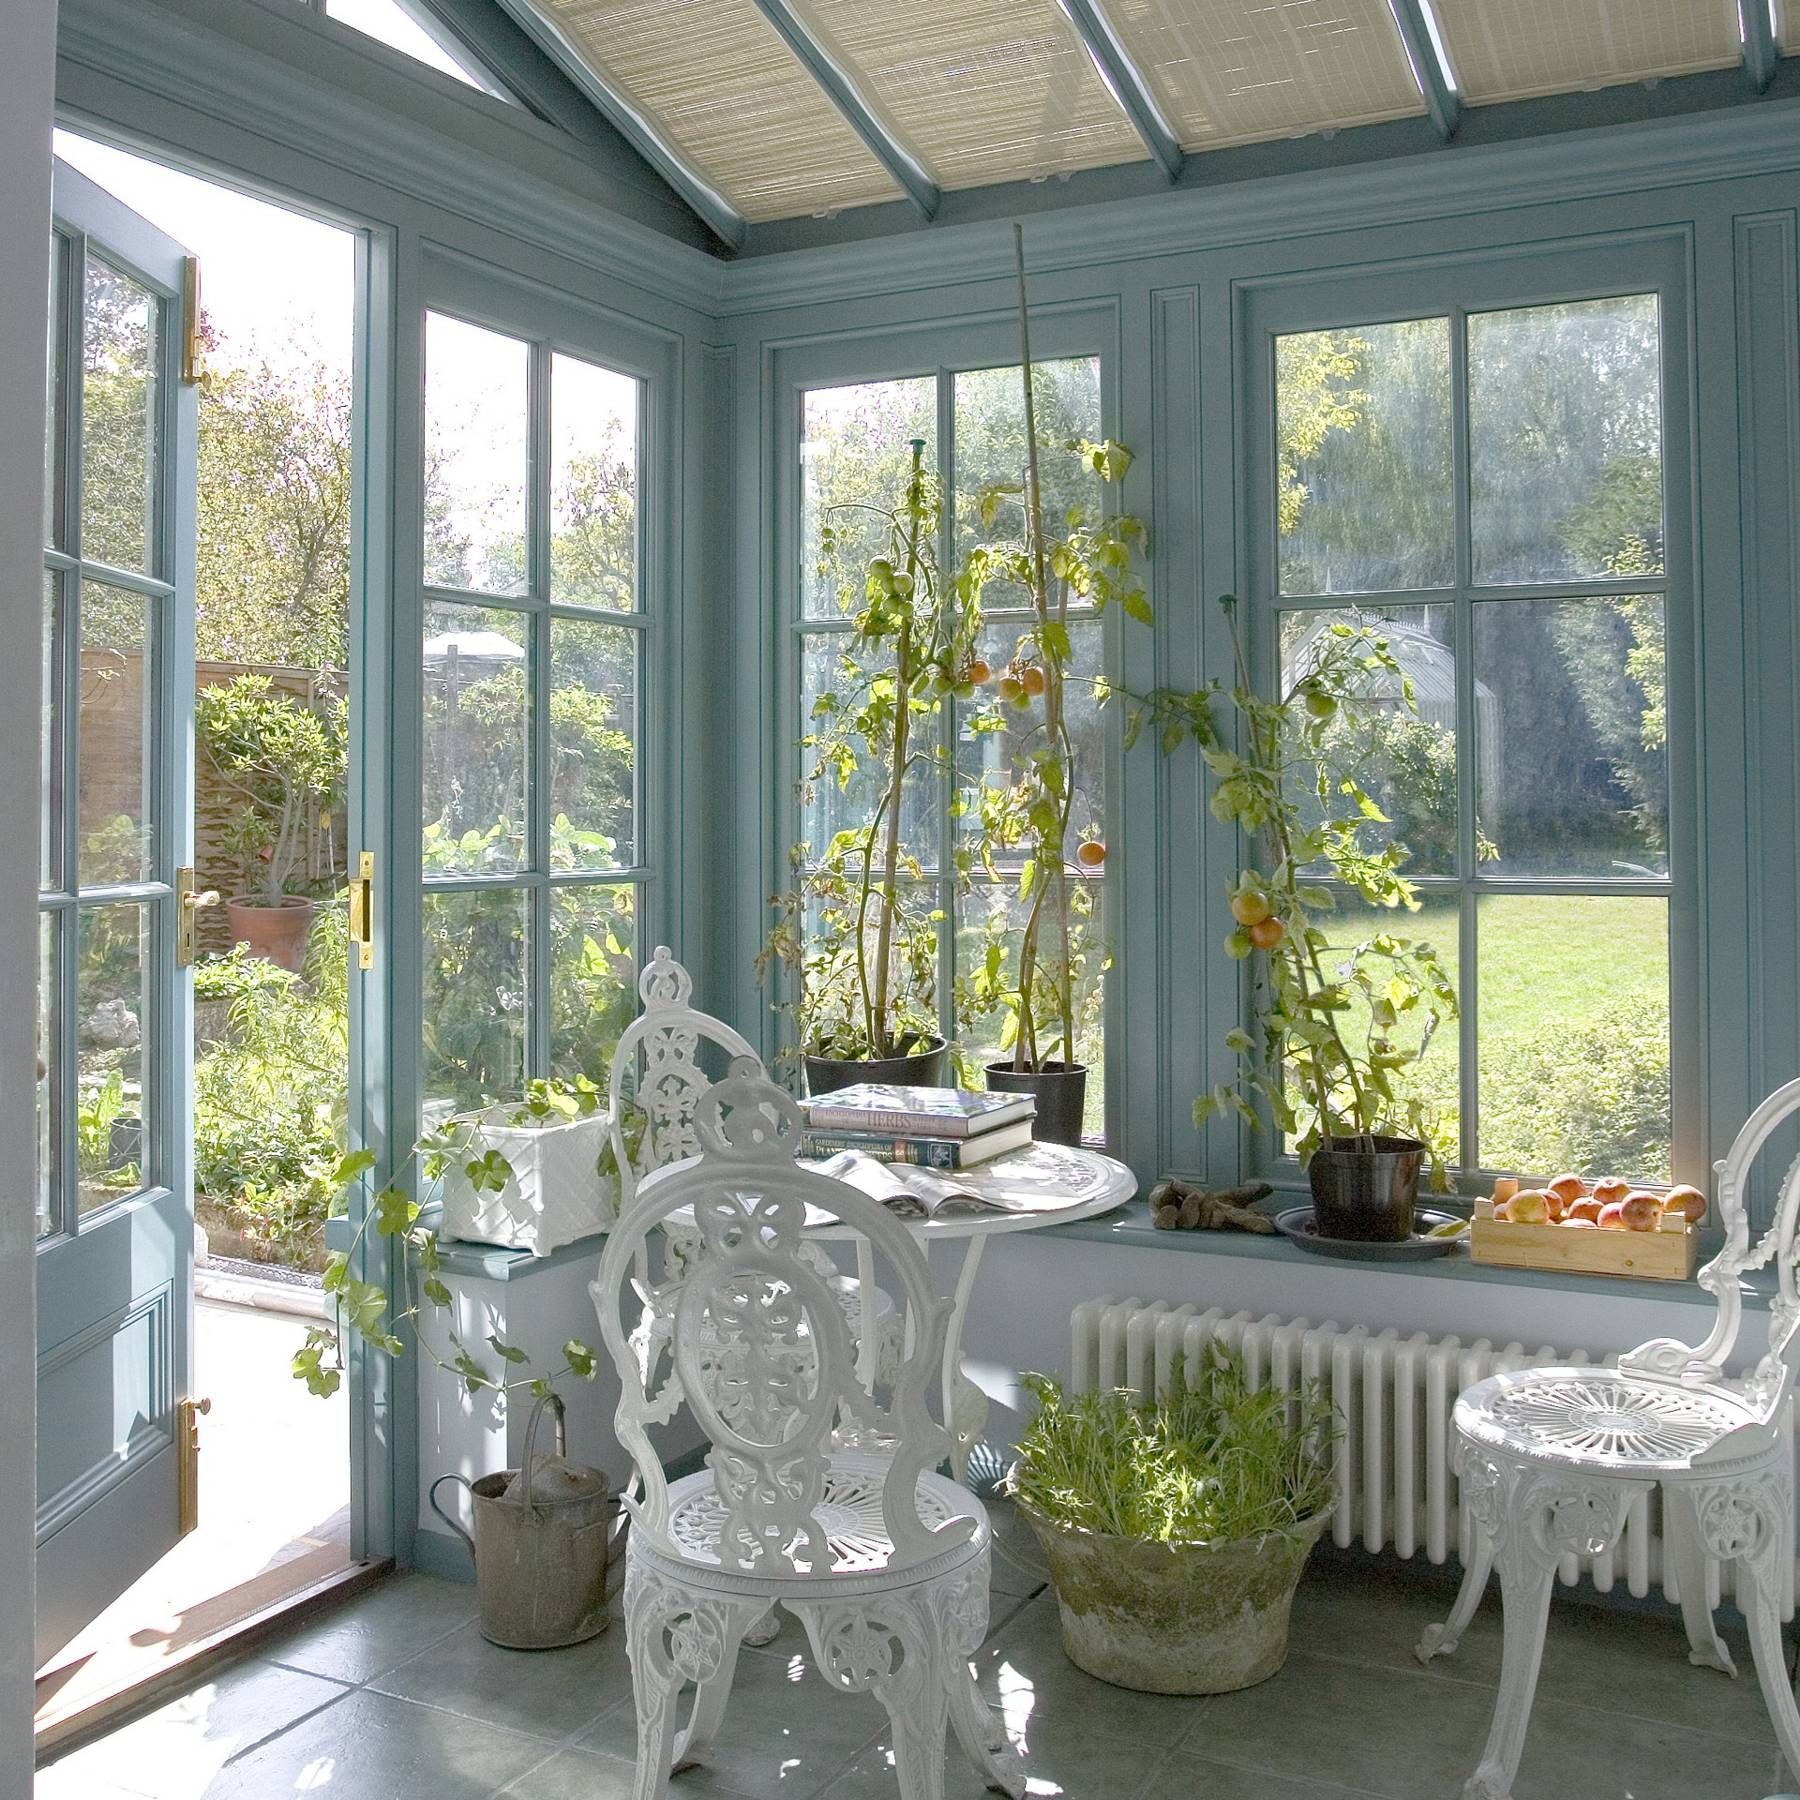 Conservatory and glass house ideas -   19 vale garden house
 ideas